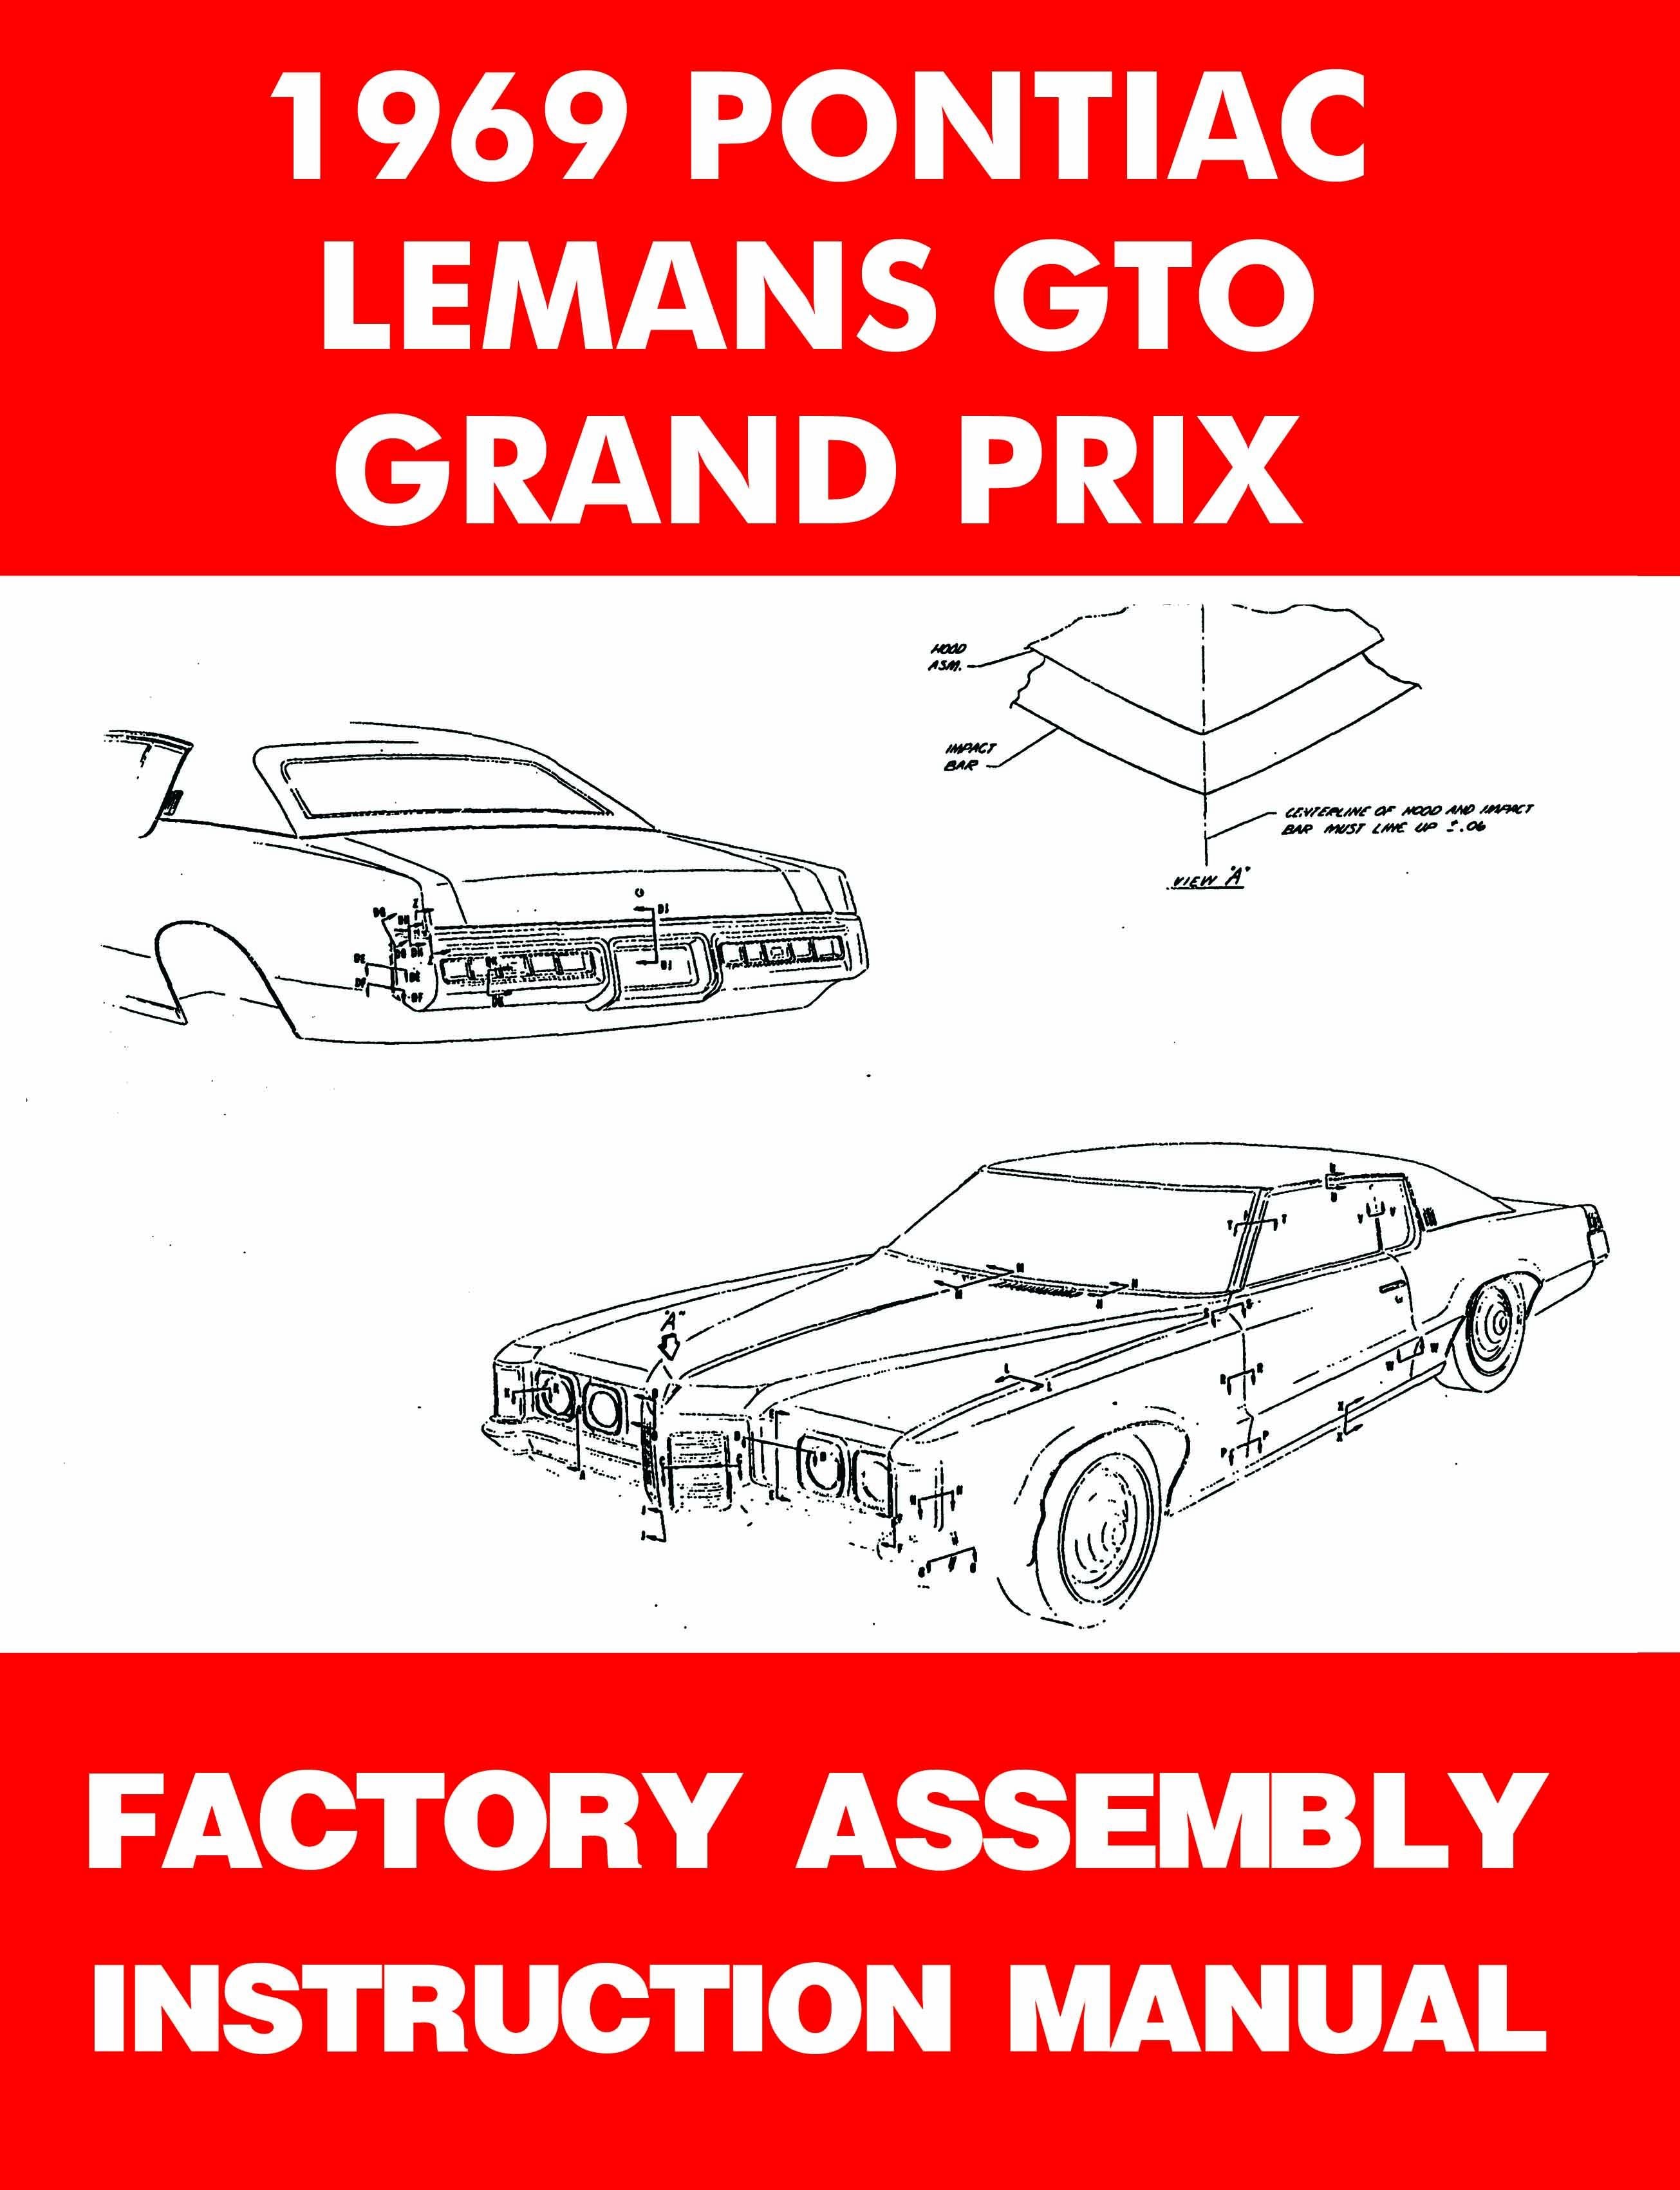 american-autowire, Factory Assembly Manual - 1969 Lemans/GTO